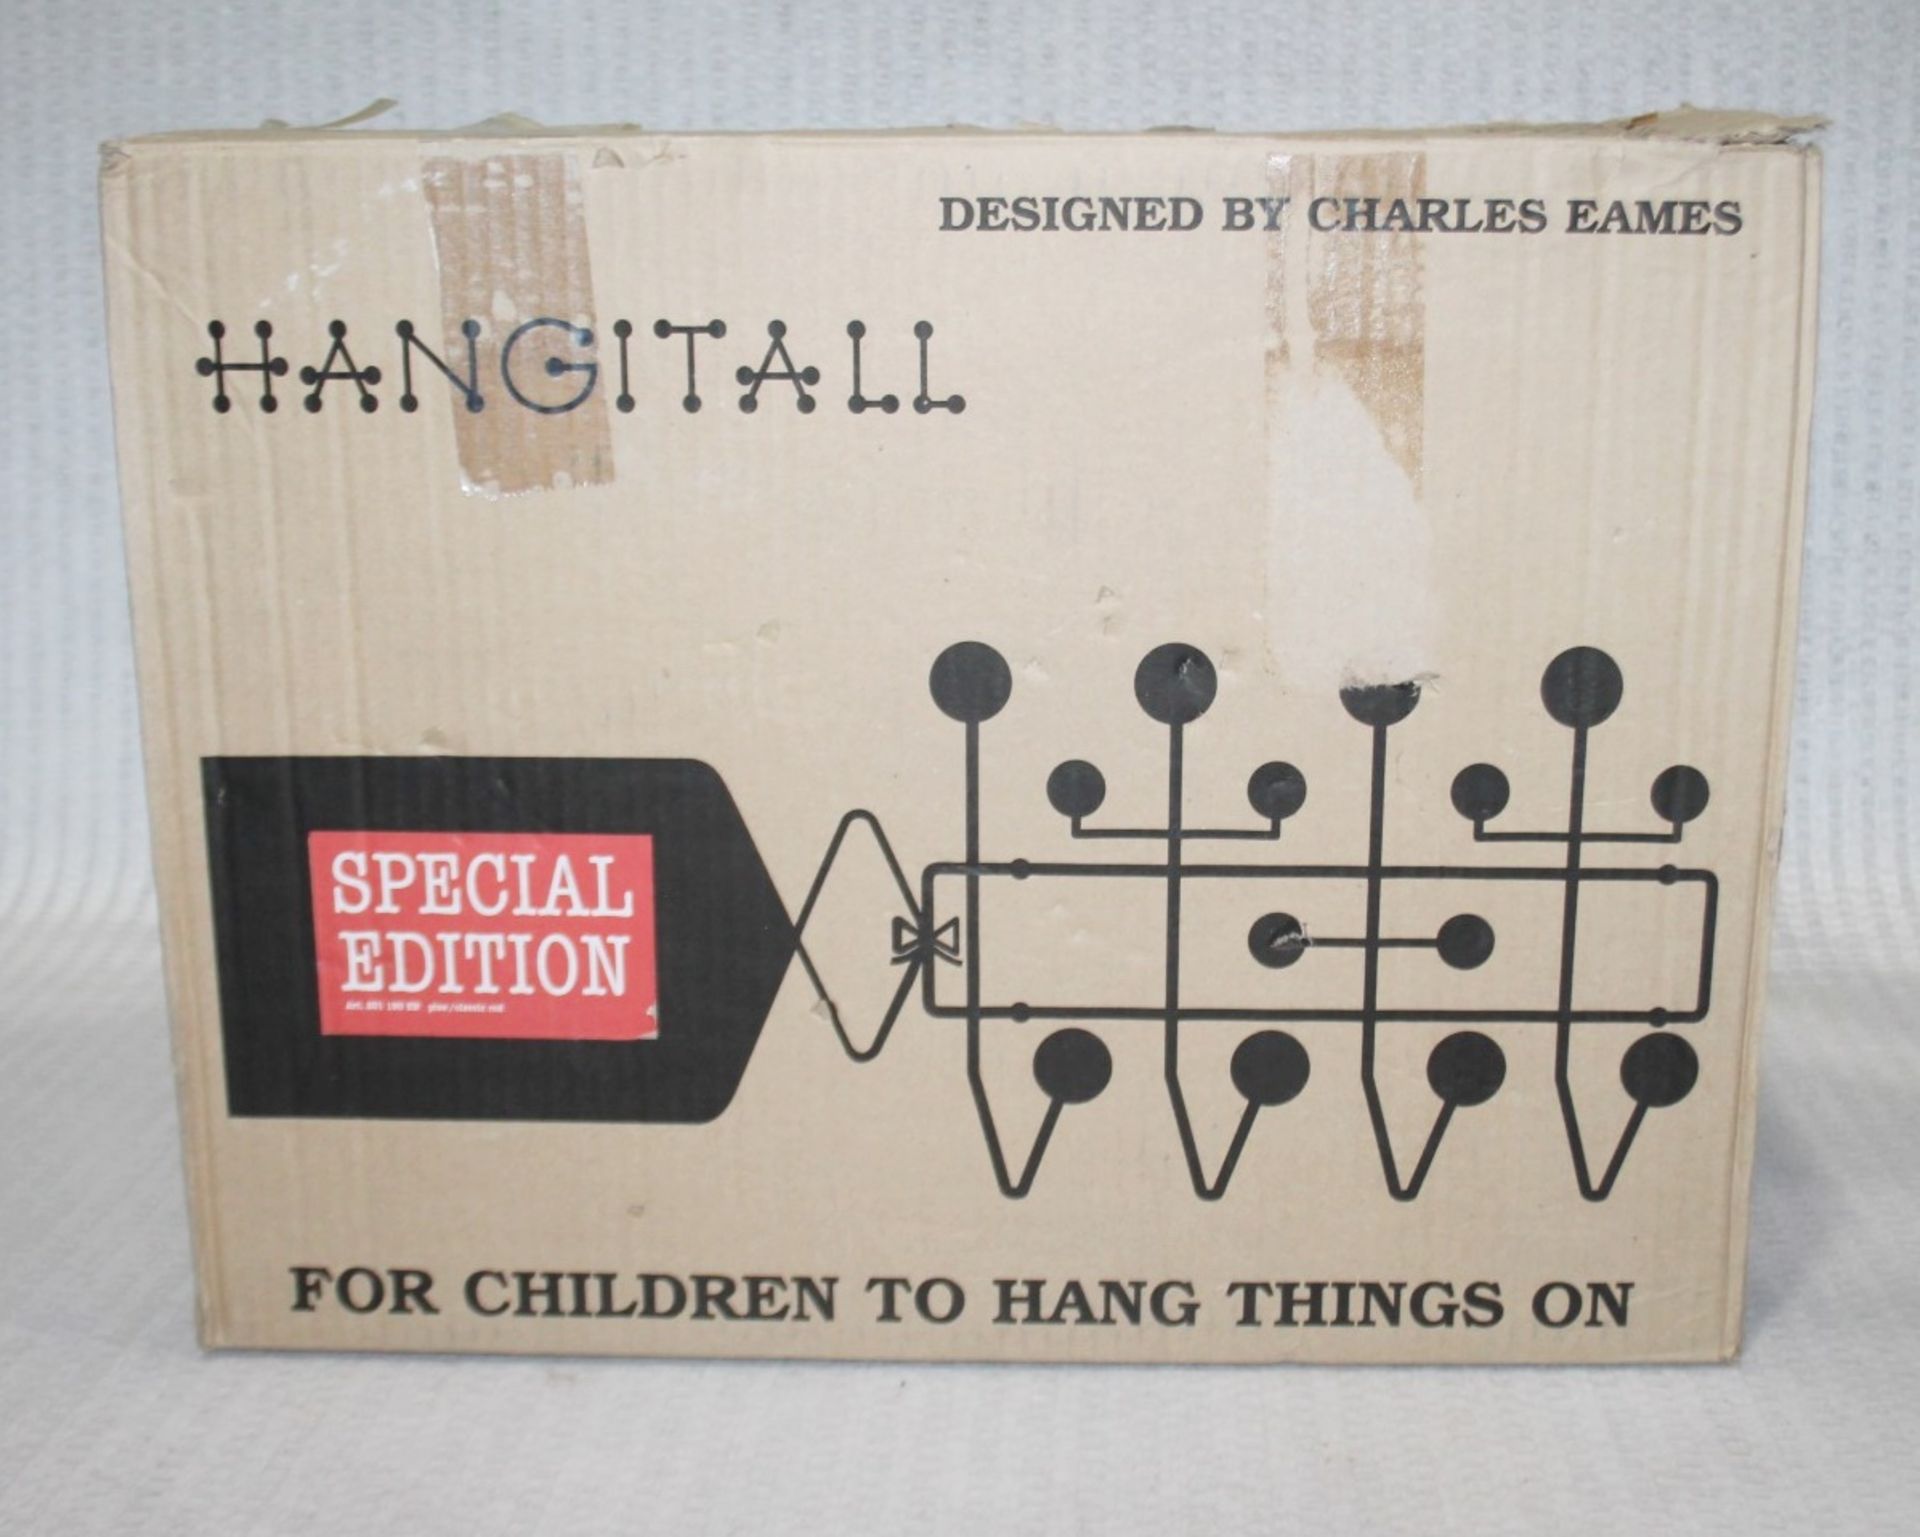 1 x VITRA Eames 'Hand It All' Special Edition Hanger In Red - Original RRP £199.00 - Unused Boxed - Image 4 of 4